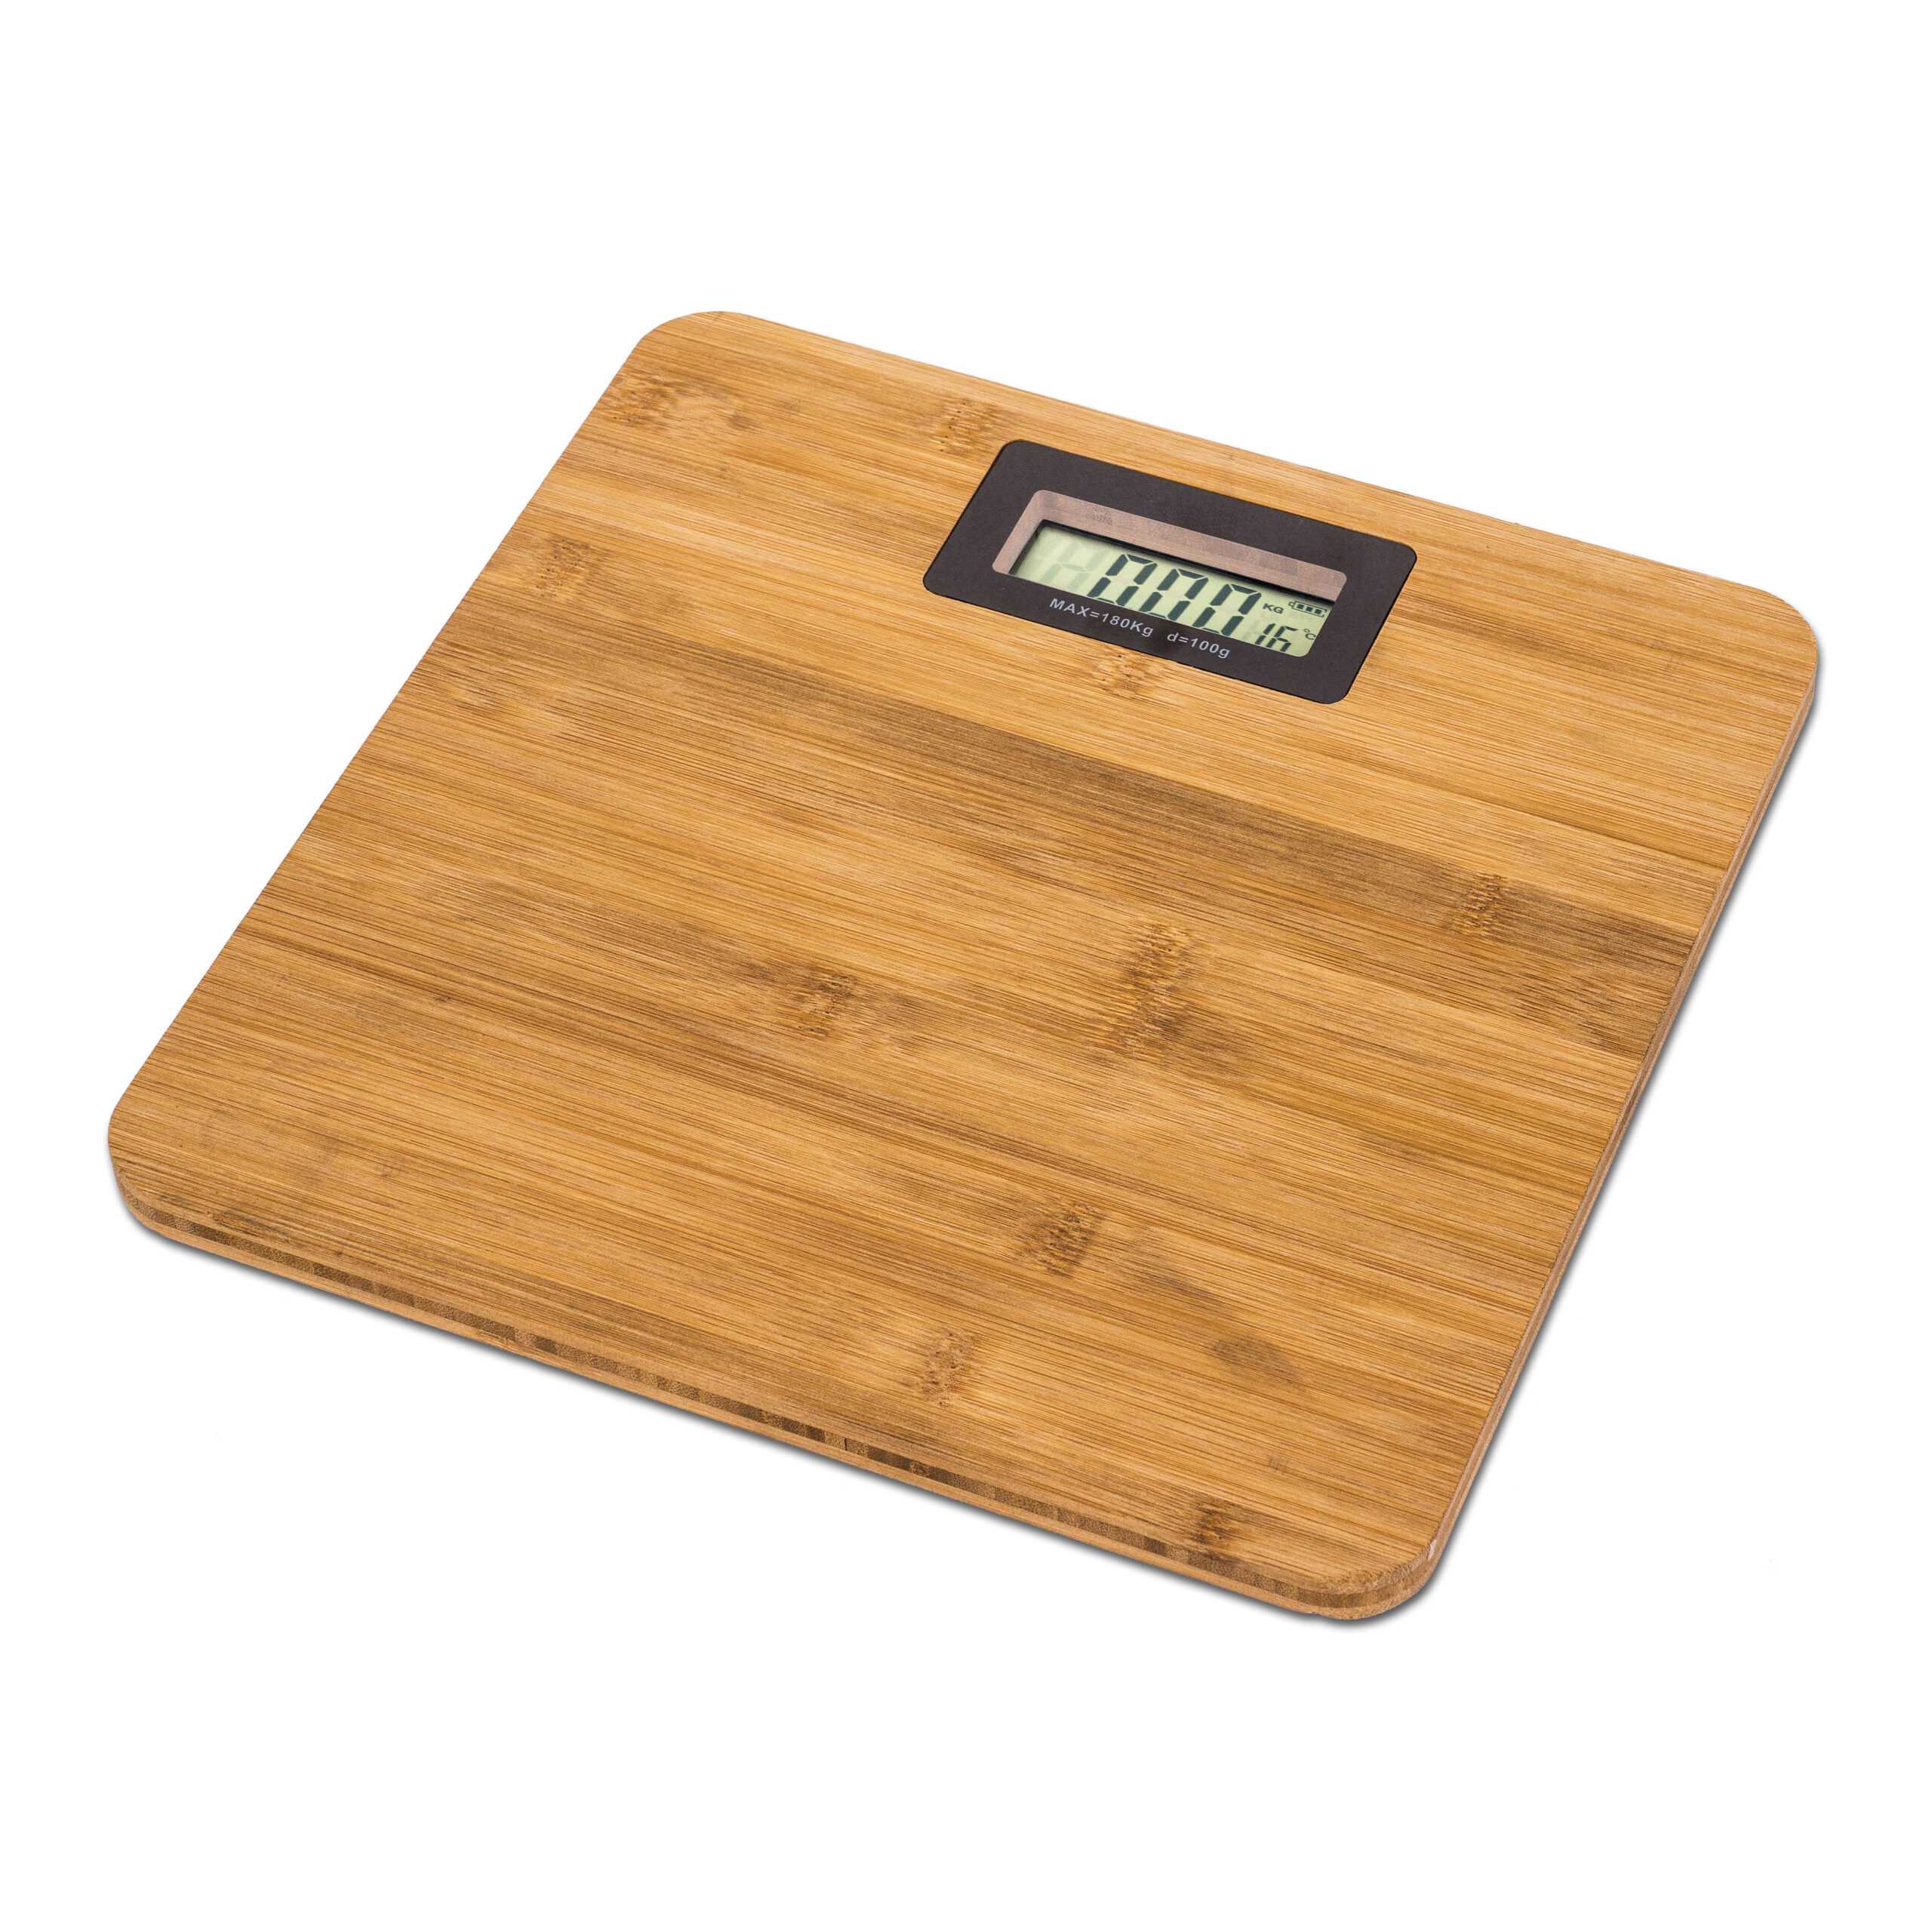 Guestinhouse Bamboo Surface Scale